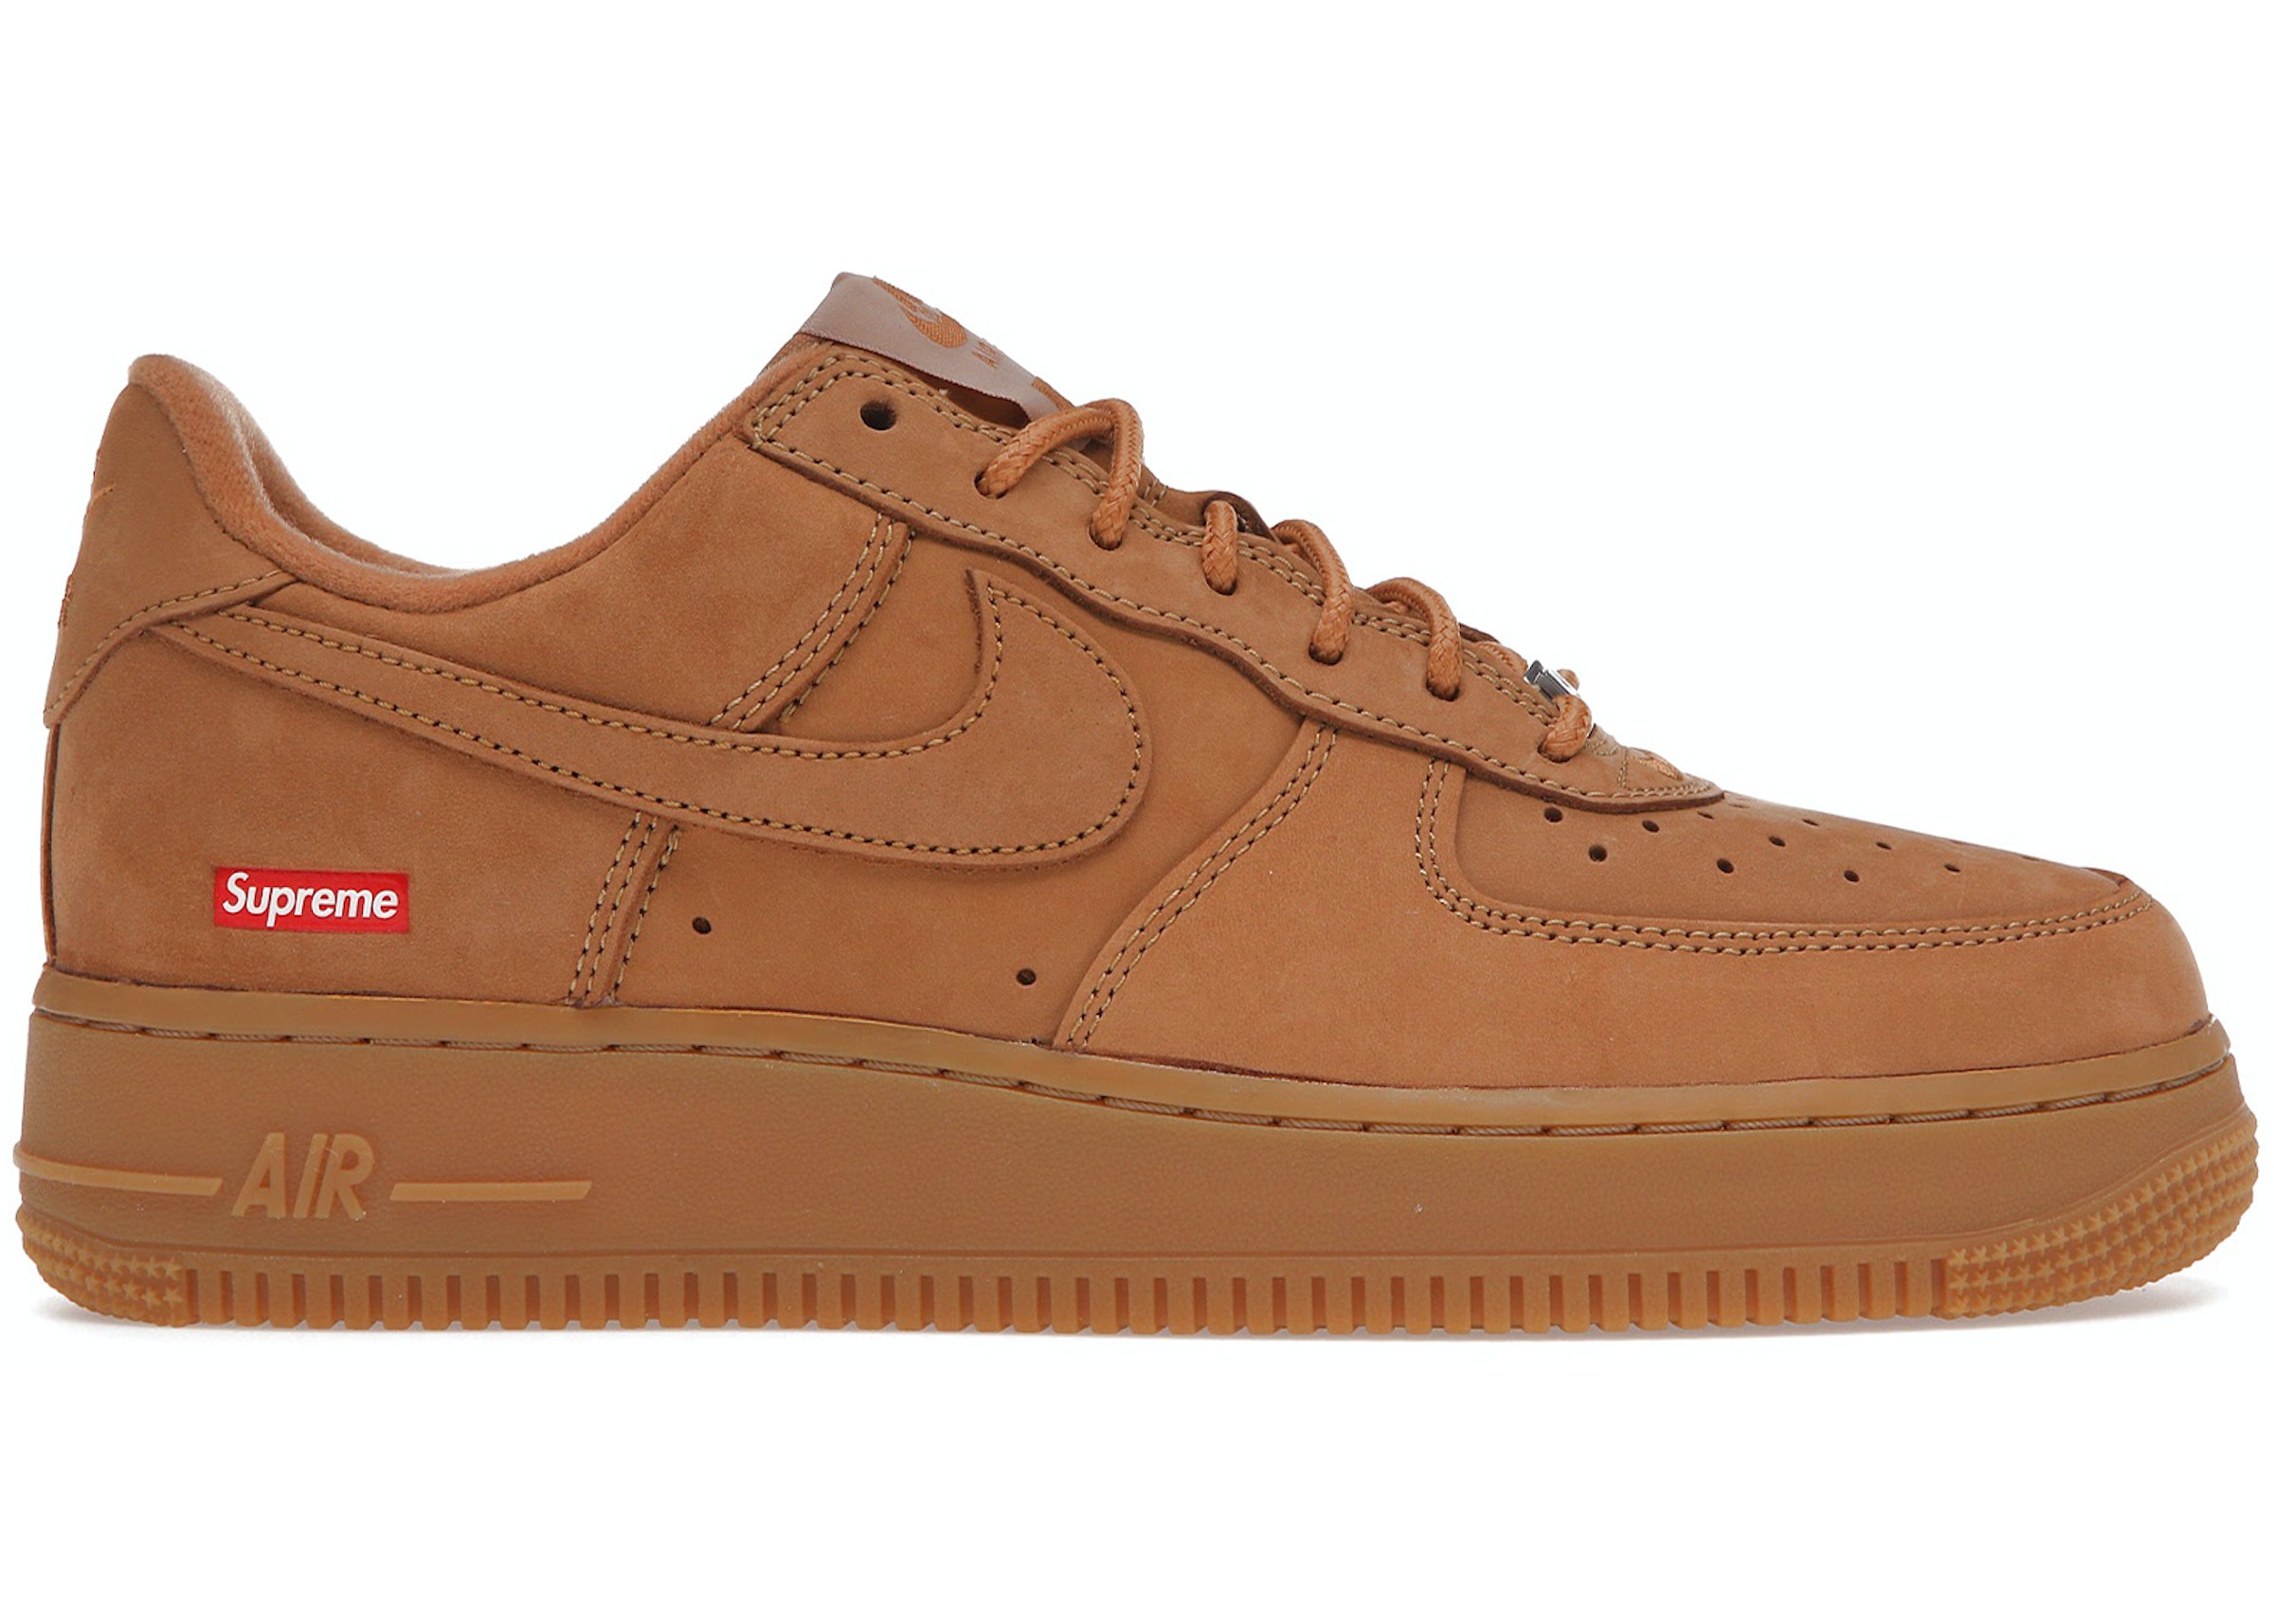 Nike Air Force 1 Low Sp Supreme Wheat - Dn1555-200 - Kr